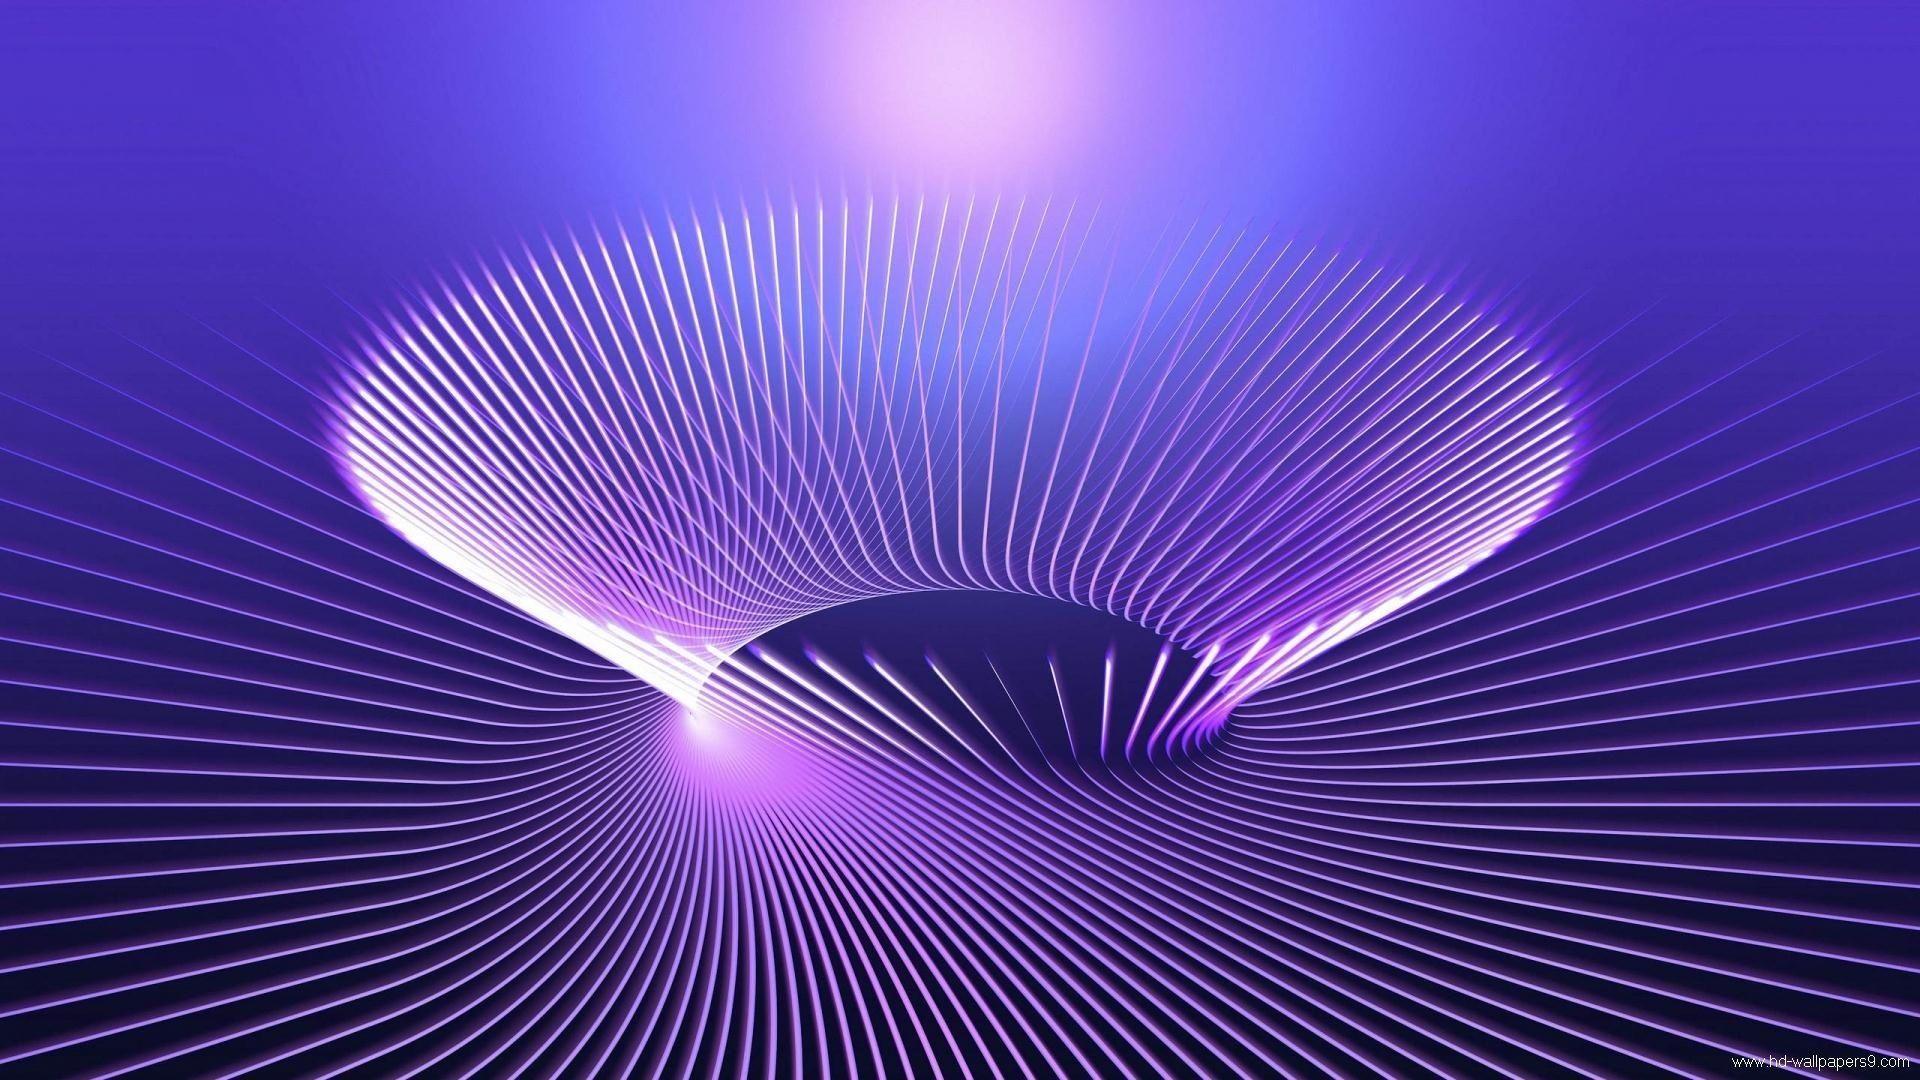 Holographic wallpaperDownload free awesome full HD background